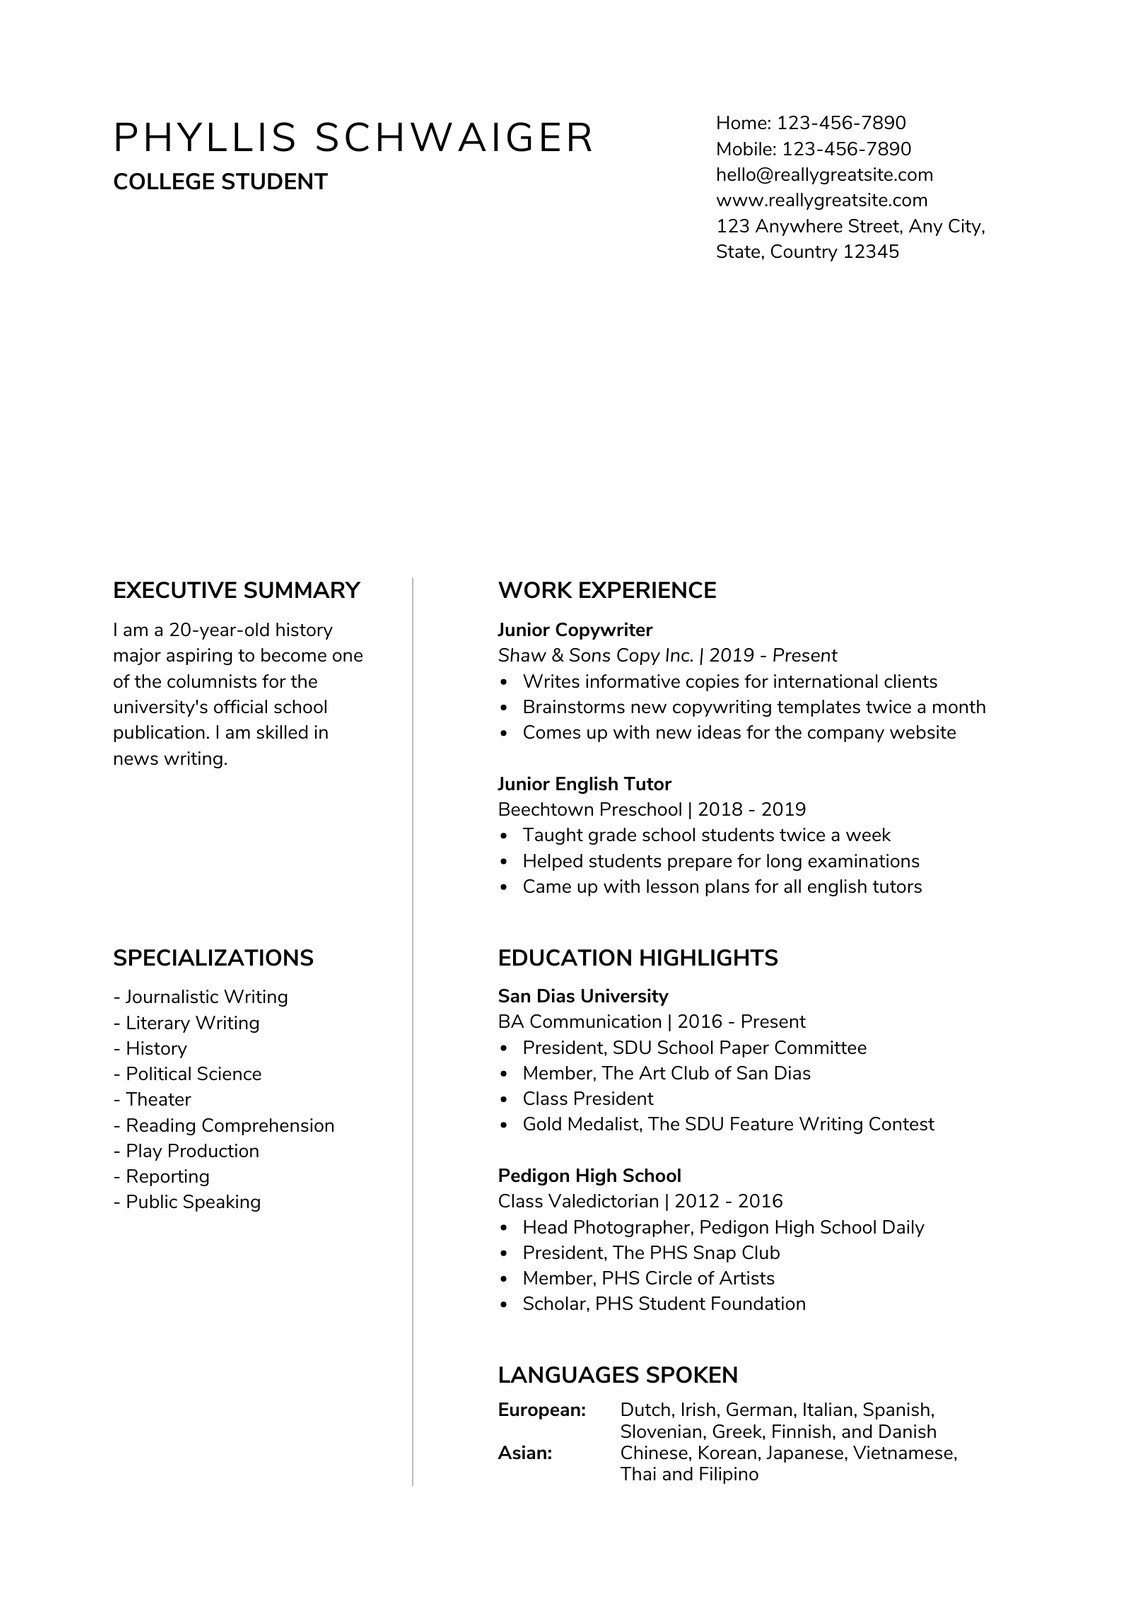 Customize 24+ College Resumes Templates Online - Canva Intended For High Resume Templates What To Look For